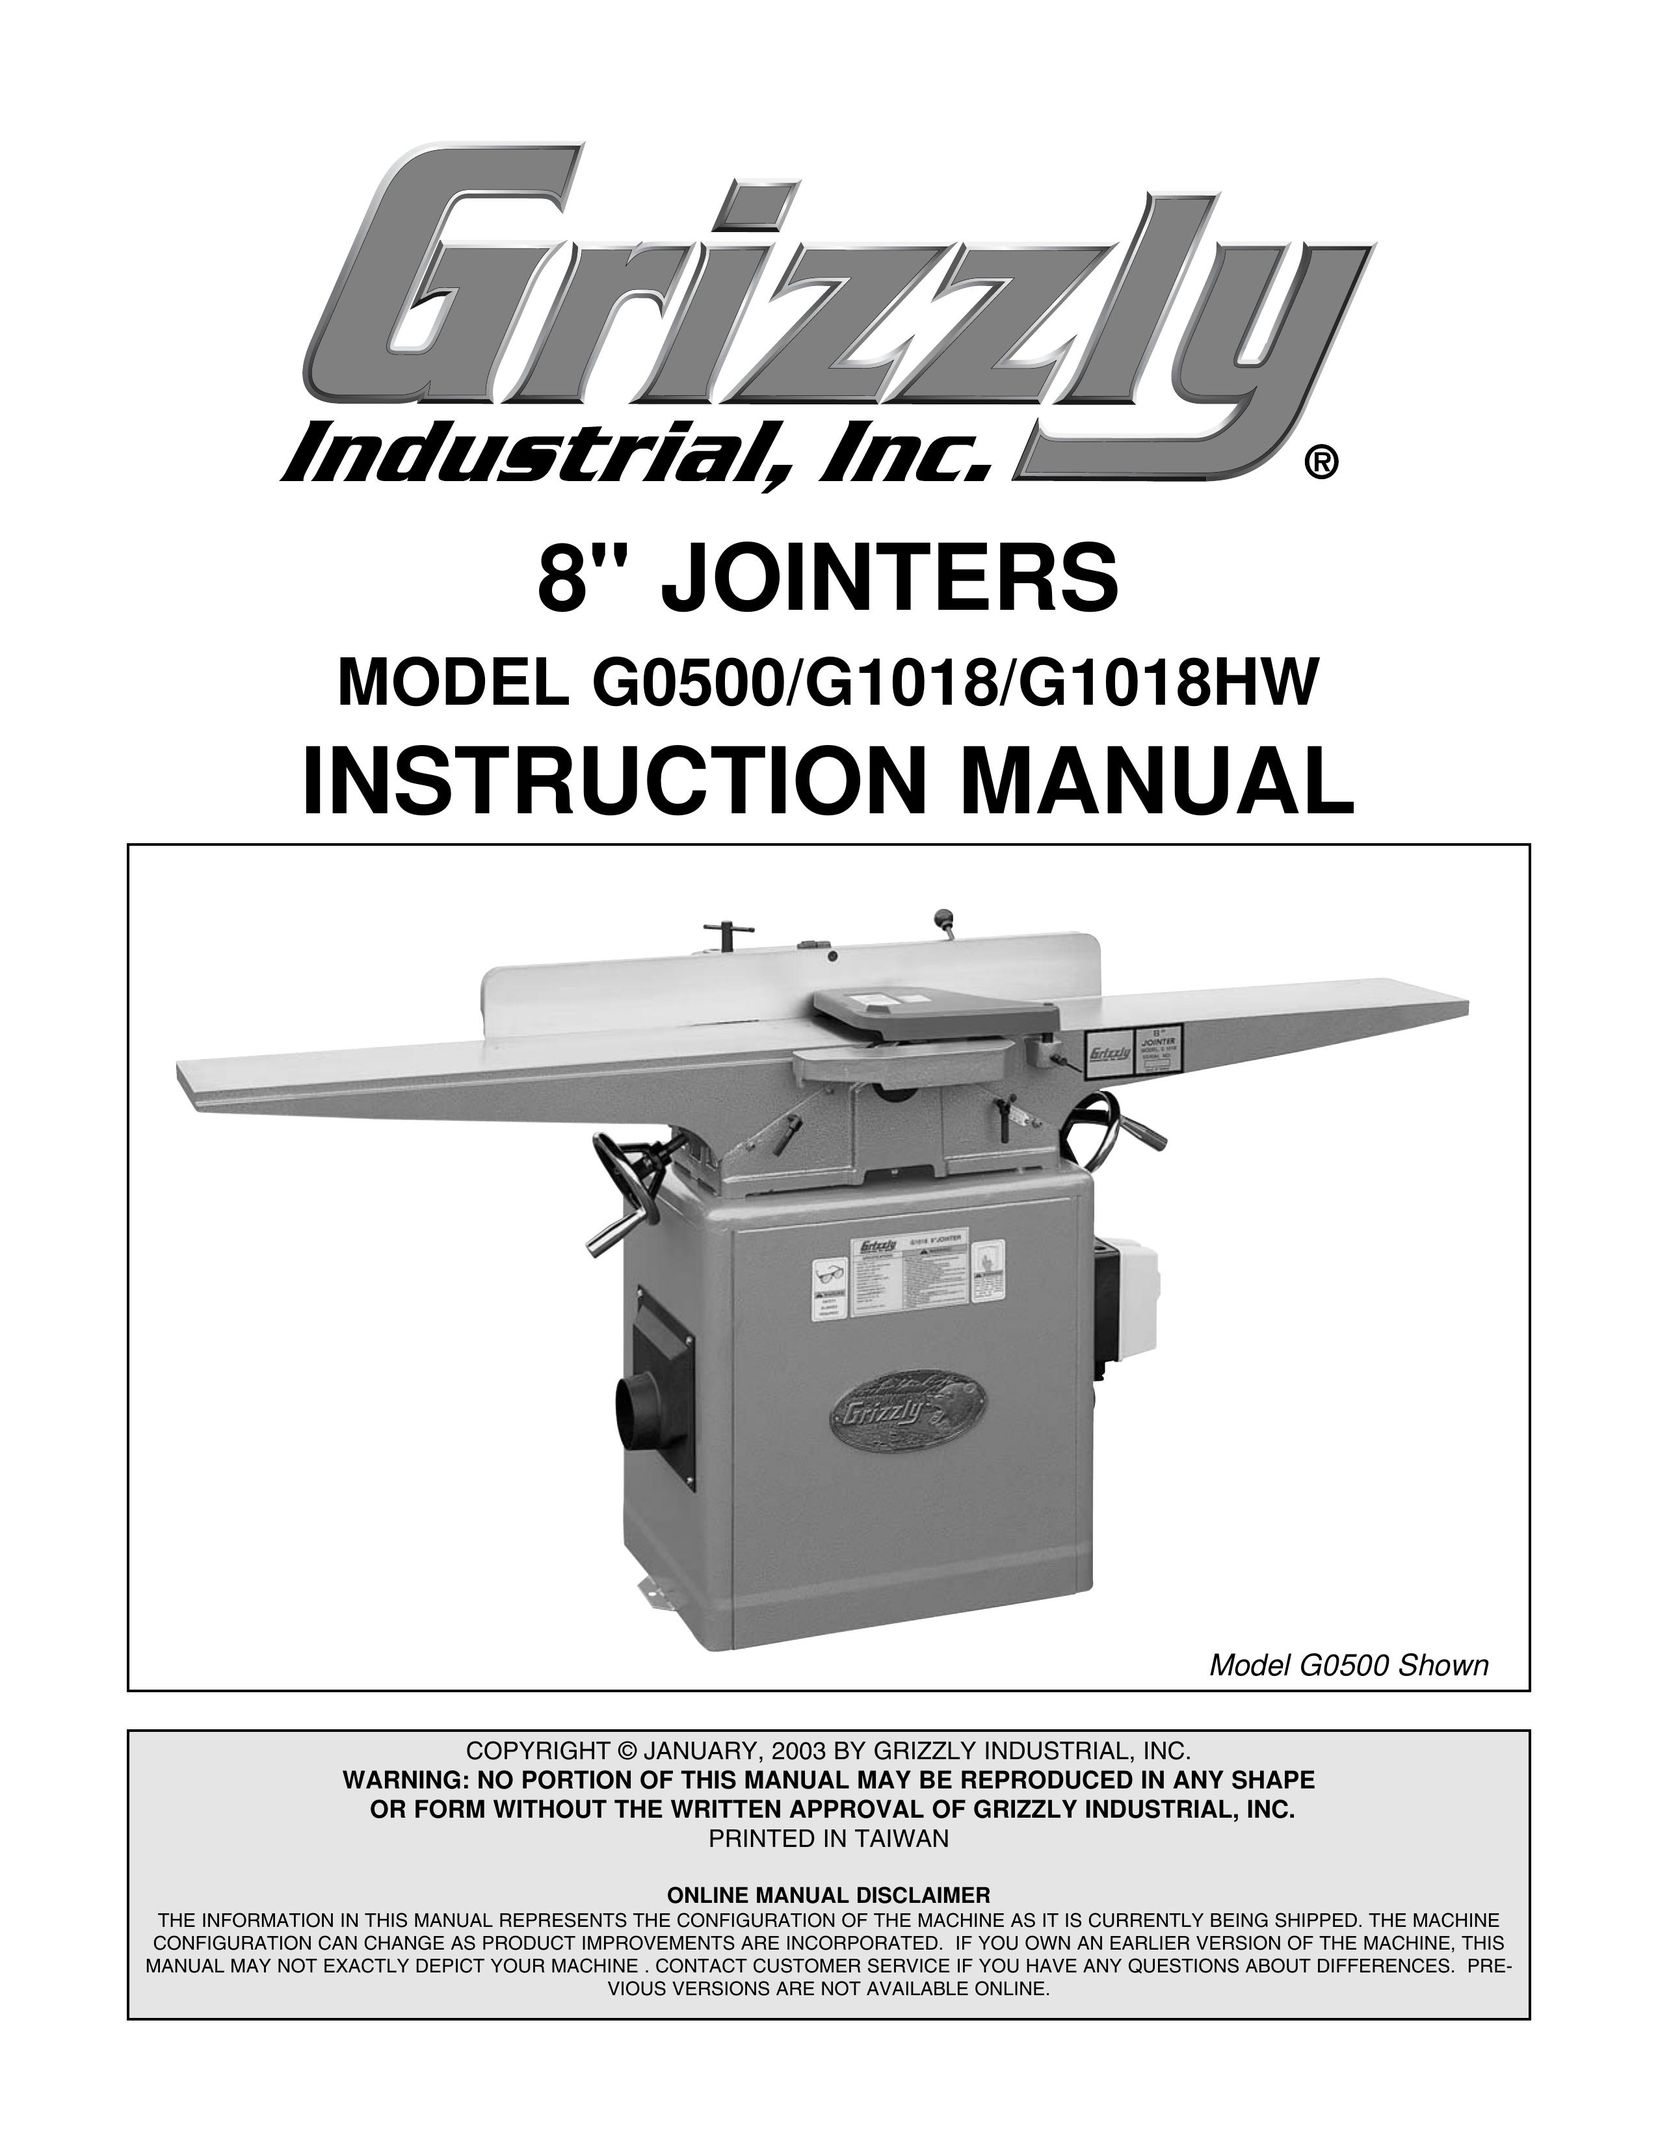 Grizzly G1018HW Biscuit Joiner User Manual